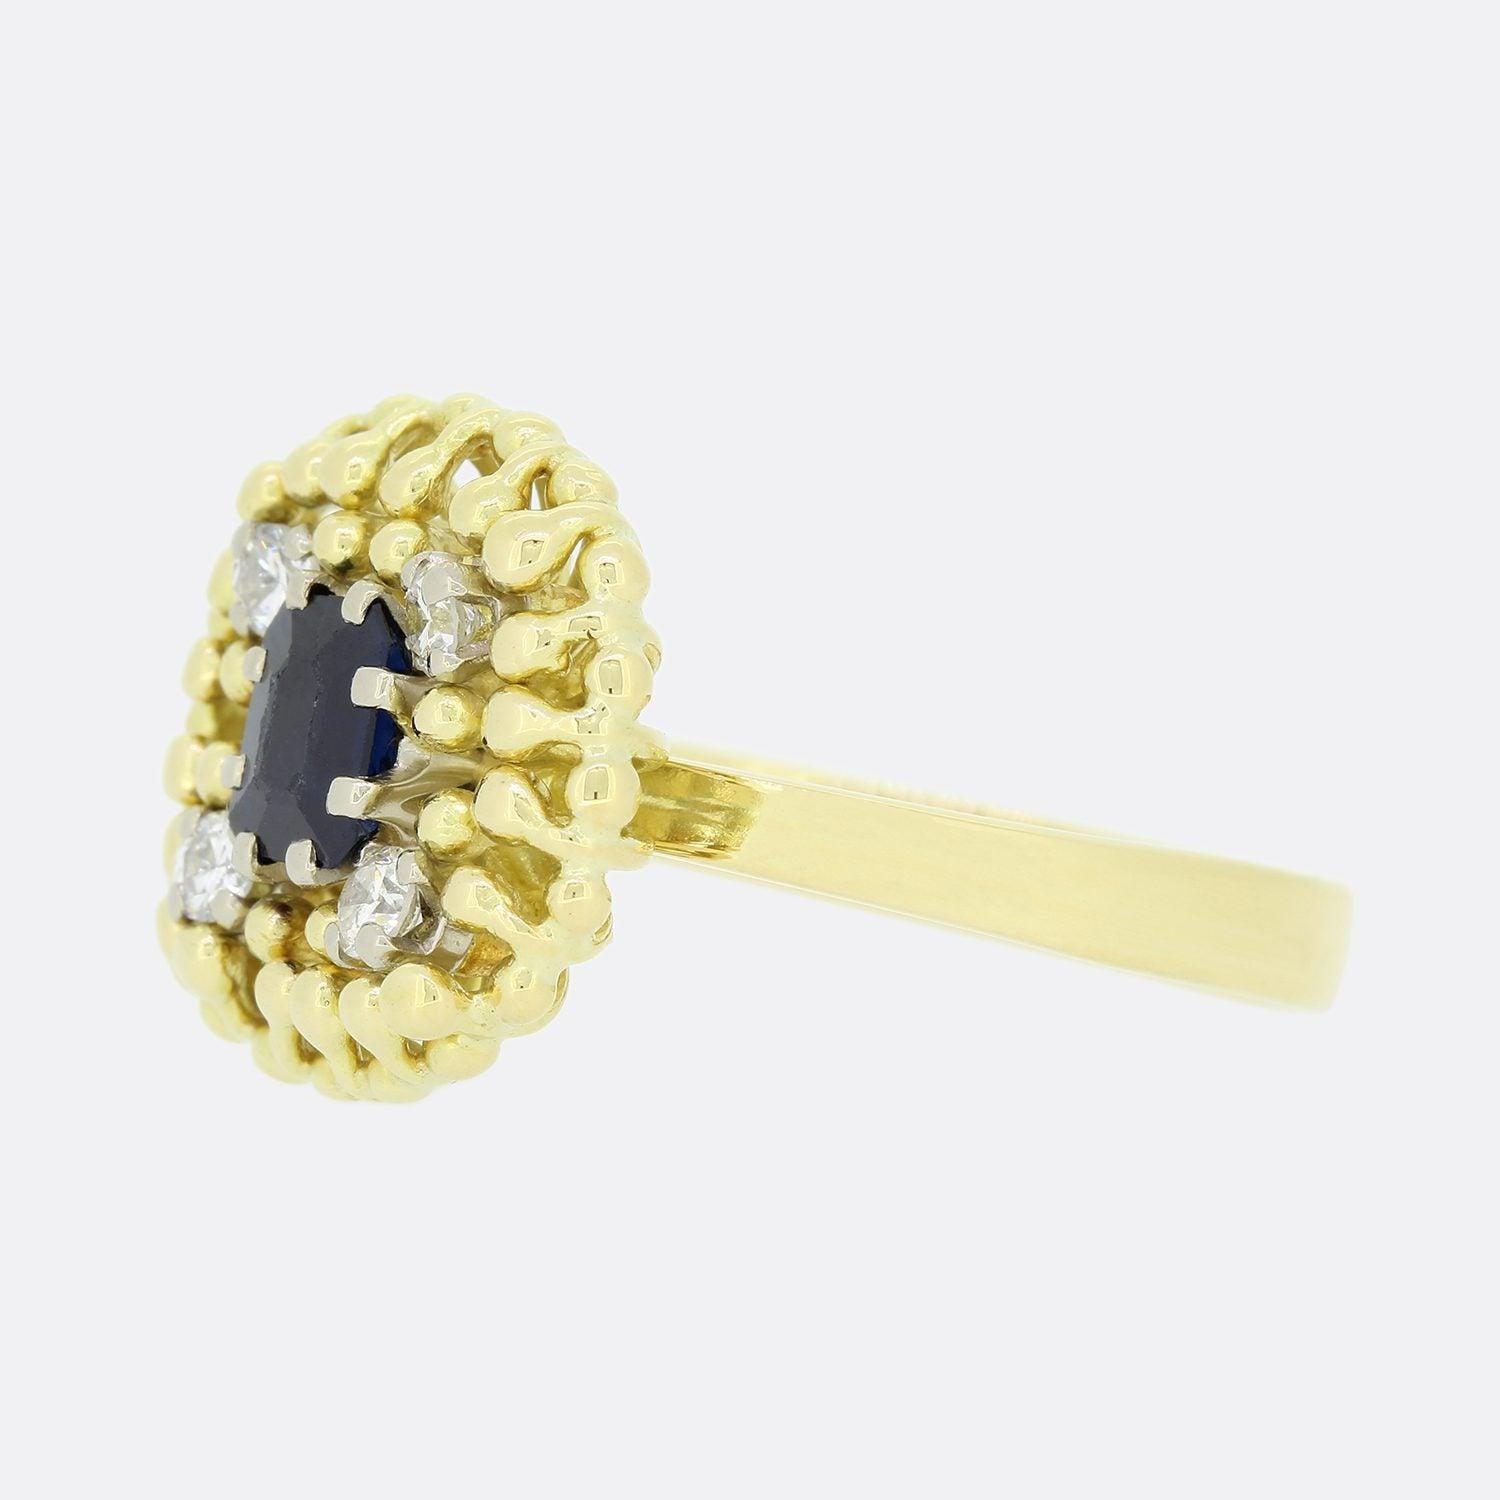 This is a beautiful vintage sapphire and diamond cluster ring. The ring features a central emerald cut blue sapphire surrounded by four round brilliant cut diamonds set on each corner of the sapphire in an abstract beaded 18ct yellow gold setting.